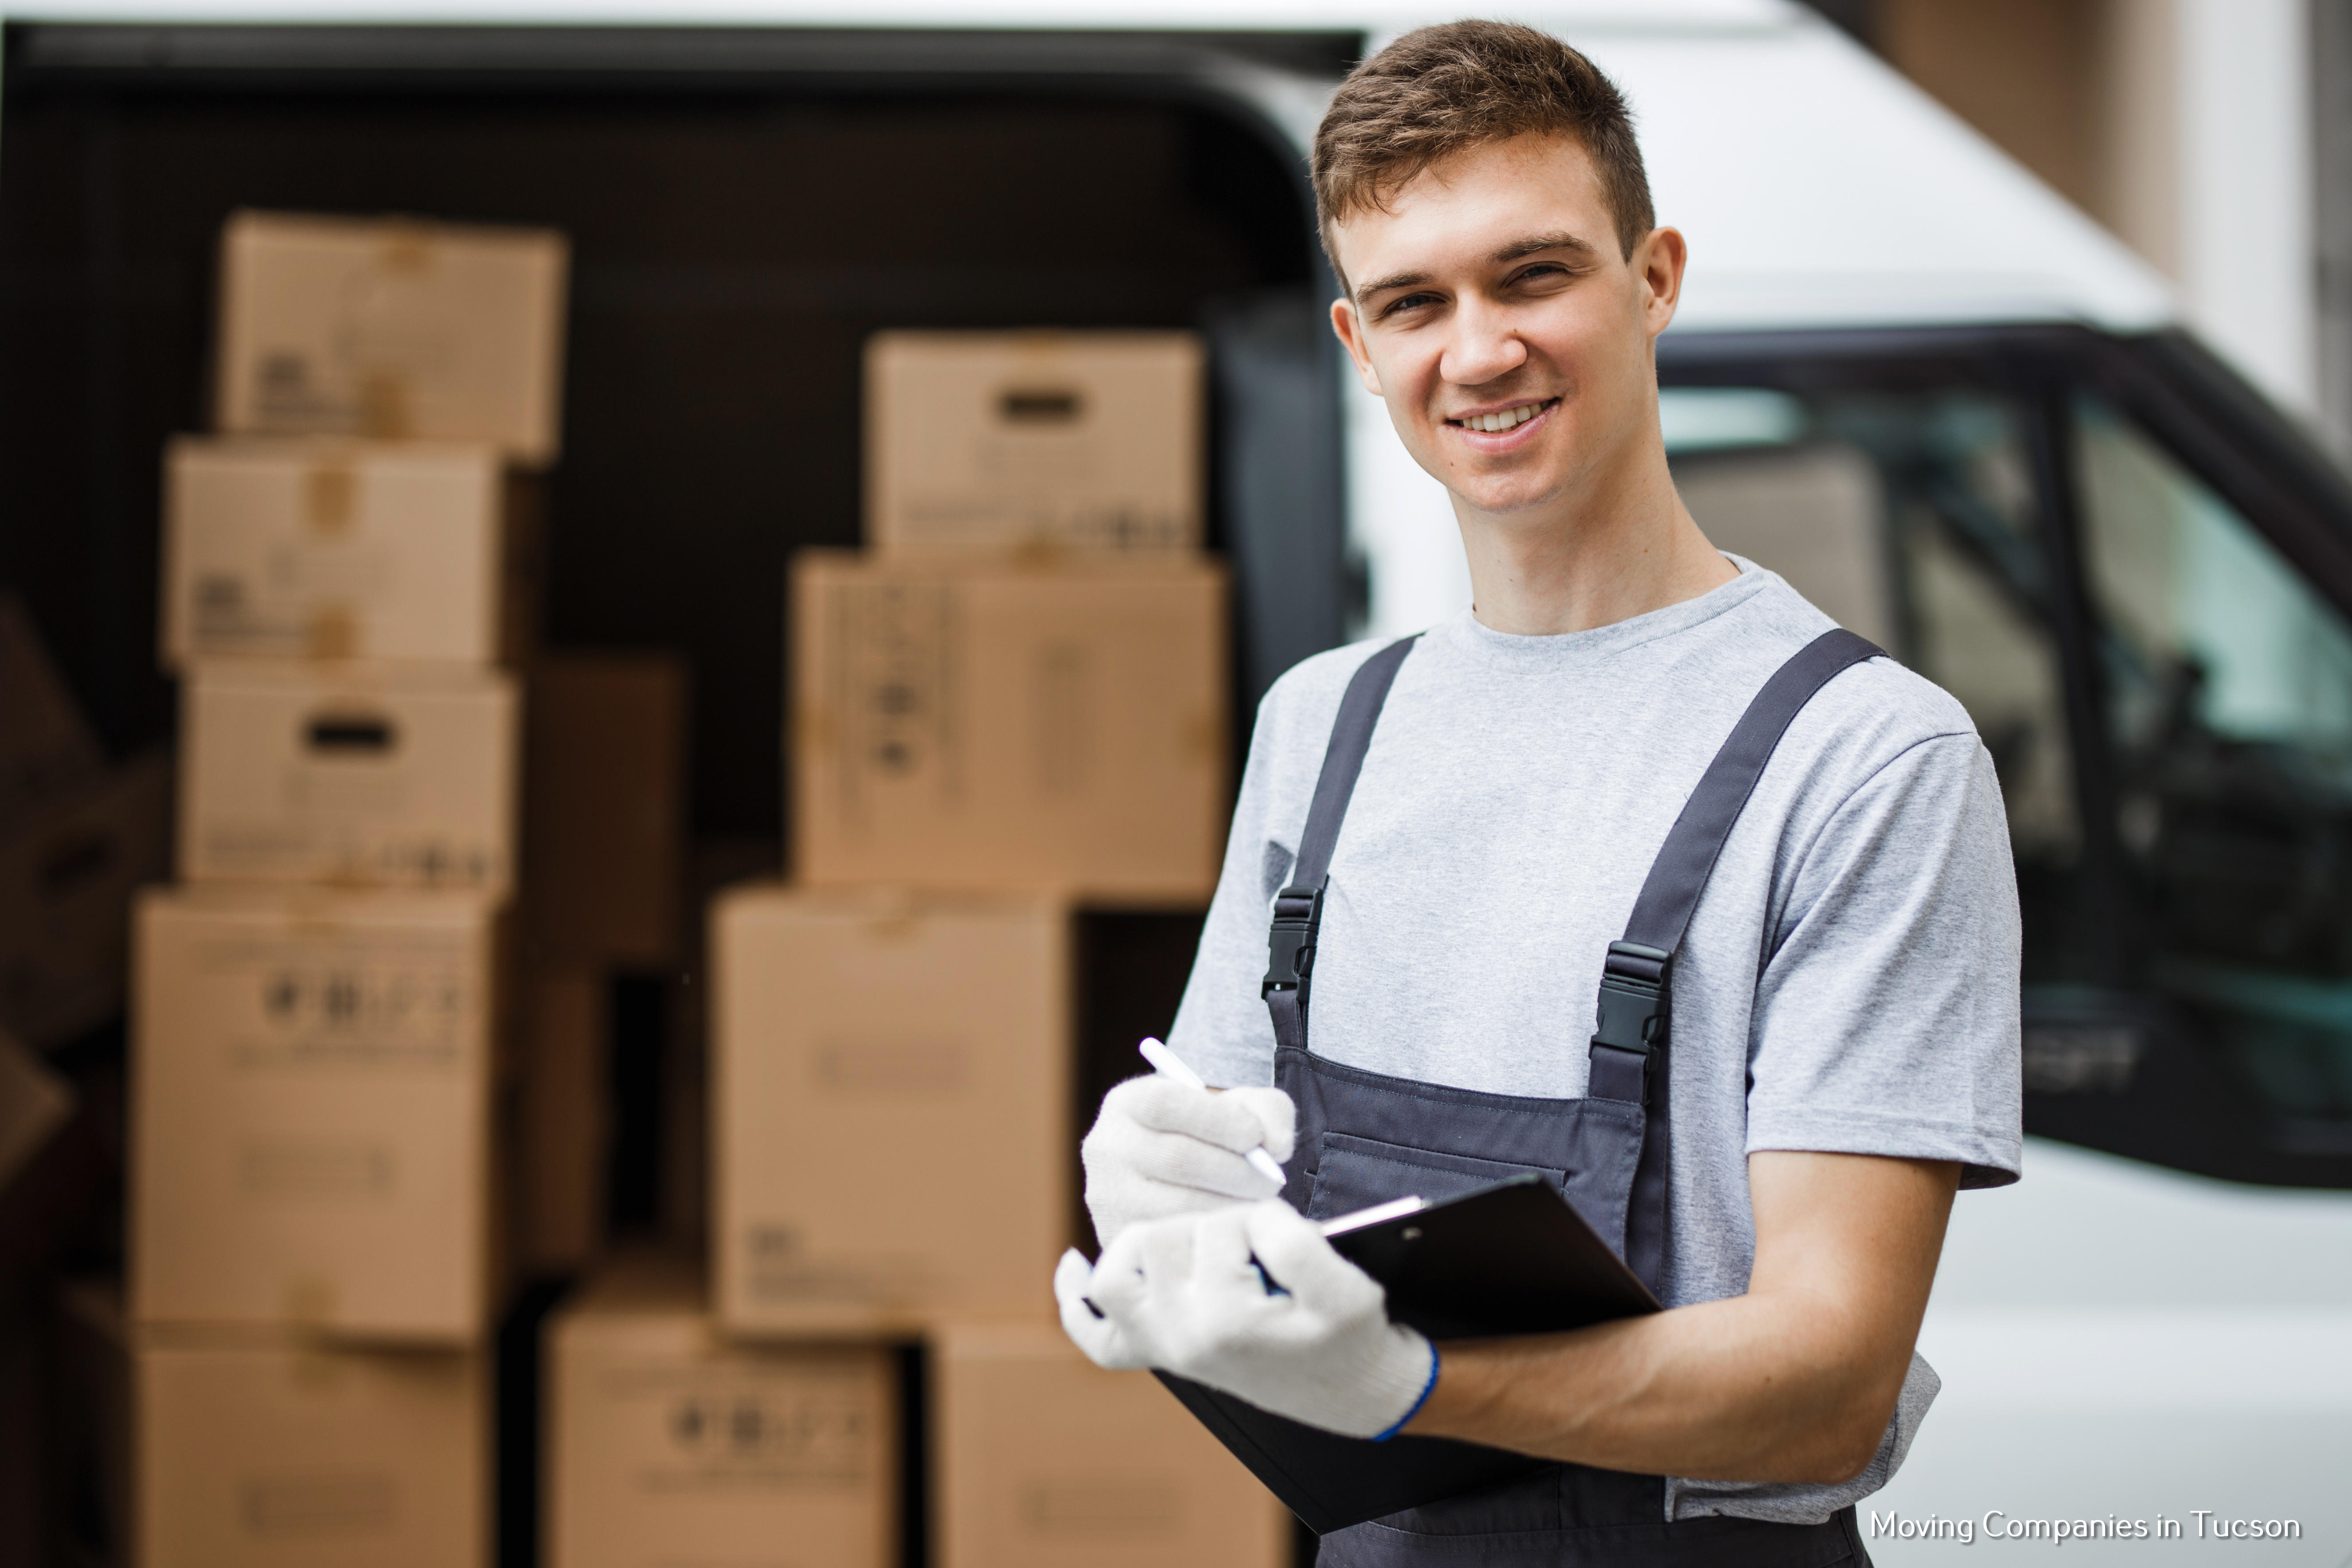 Tucson Moving Service Provides Awareness of its Quality Residential and Commercial Moving Services